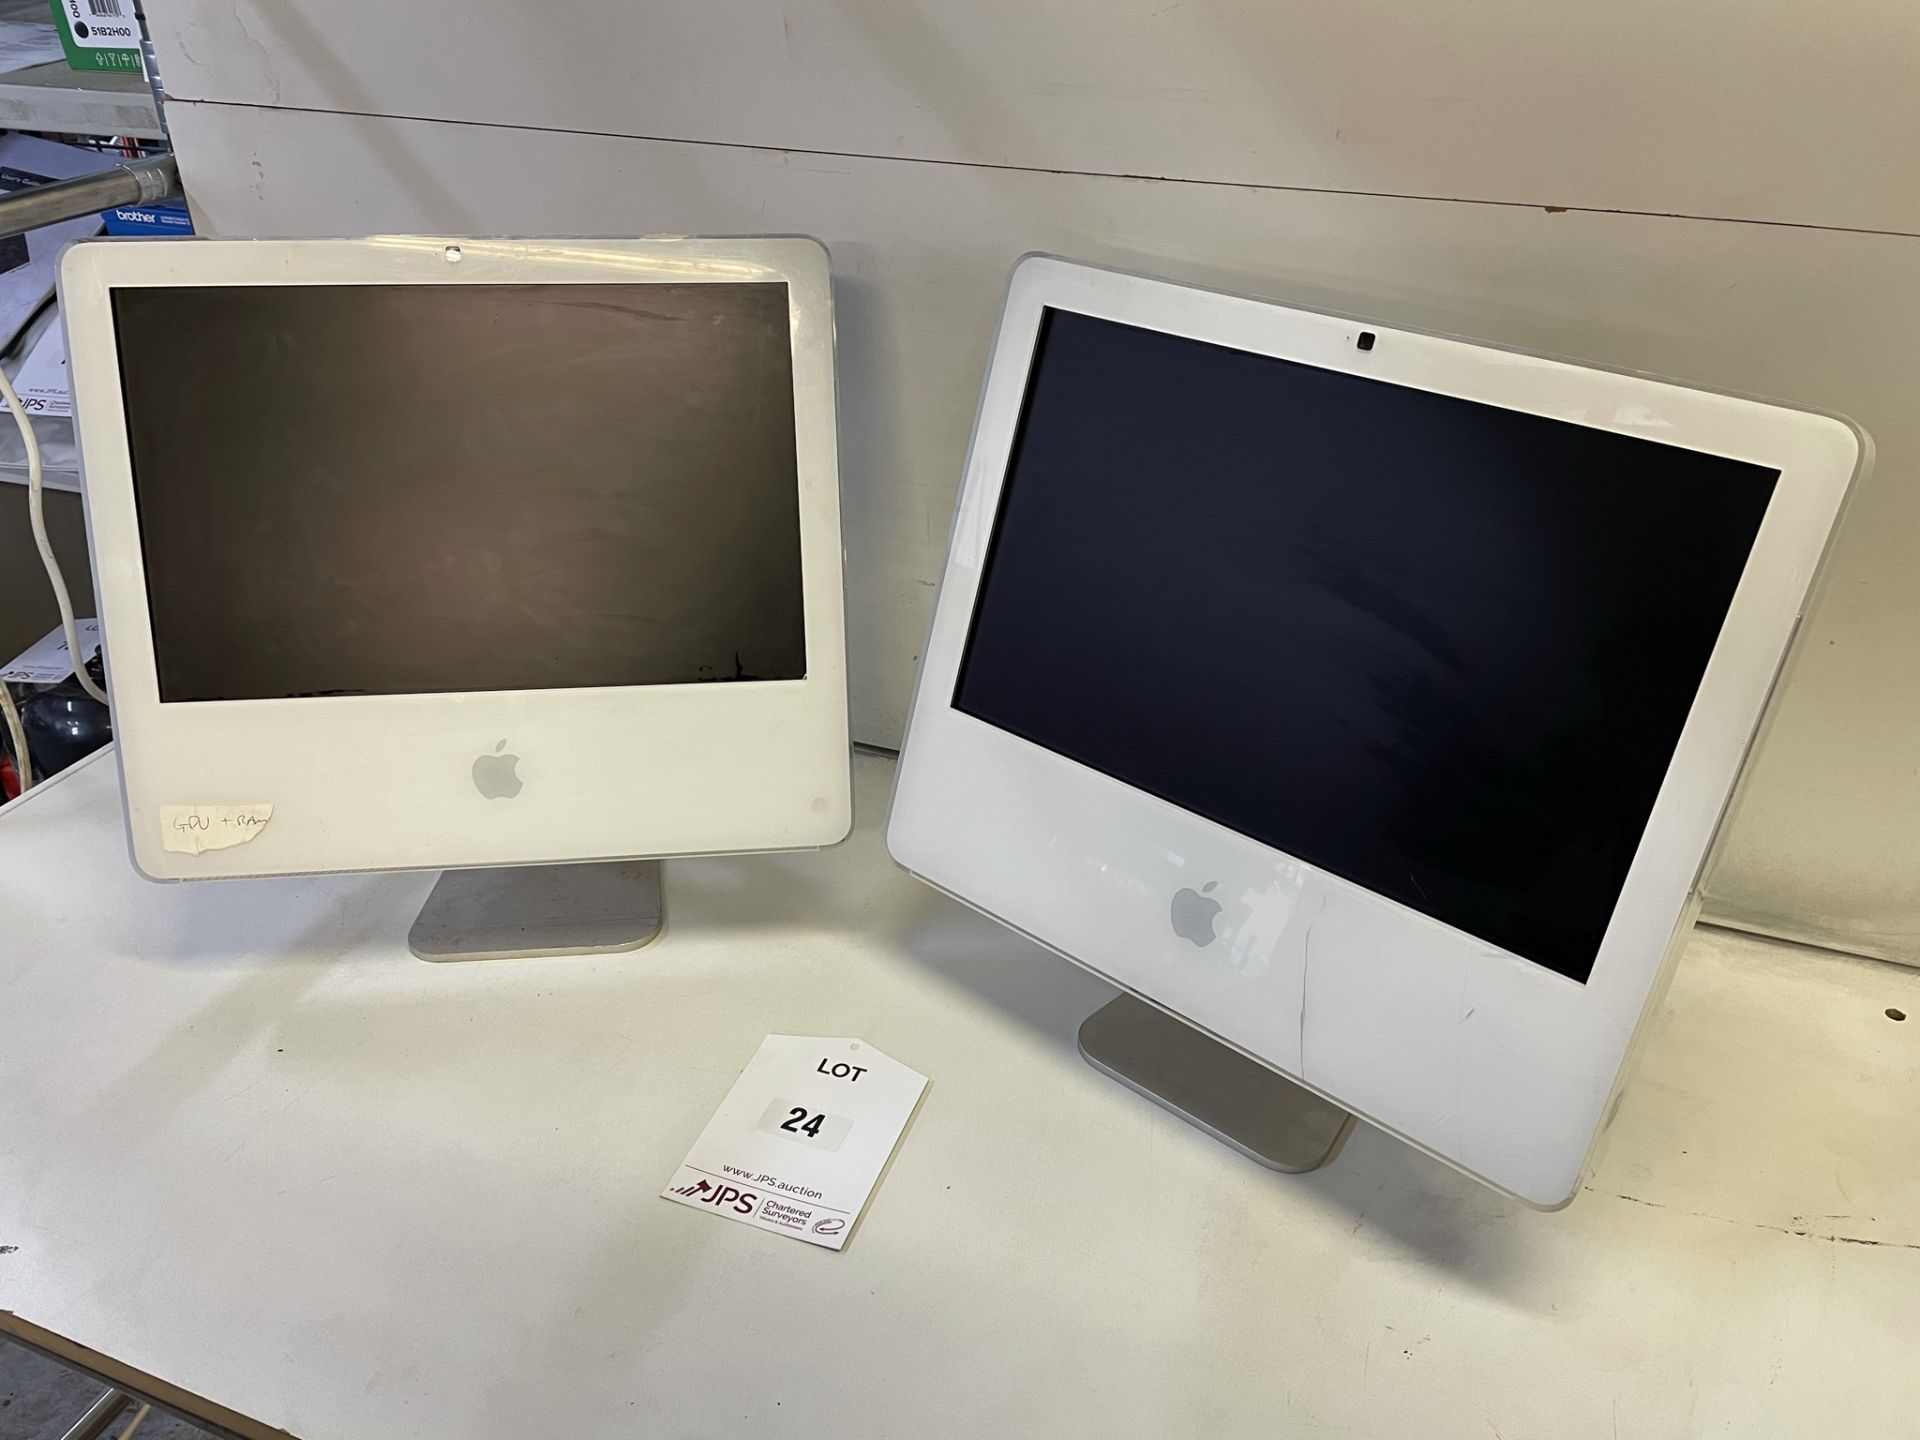 2 x Various Apple A1208/A1195 iMac All-in-One Computers - Image 3 of 5